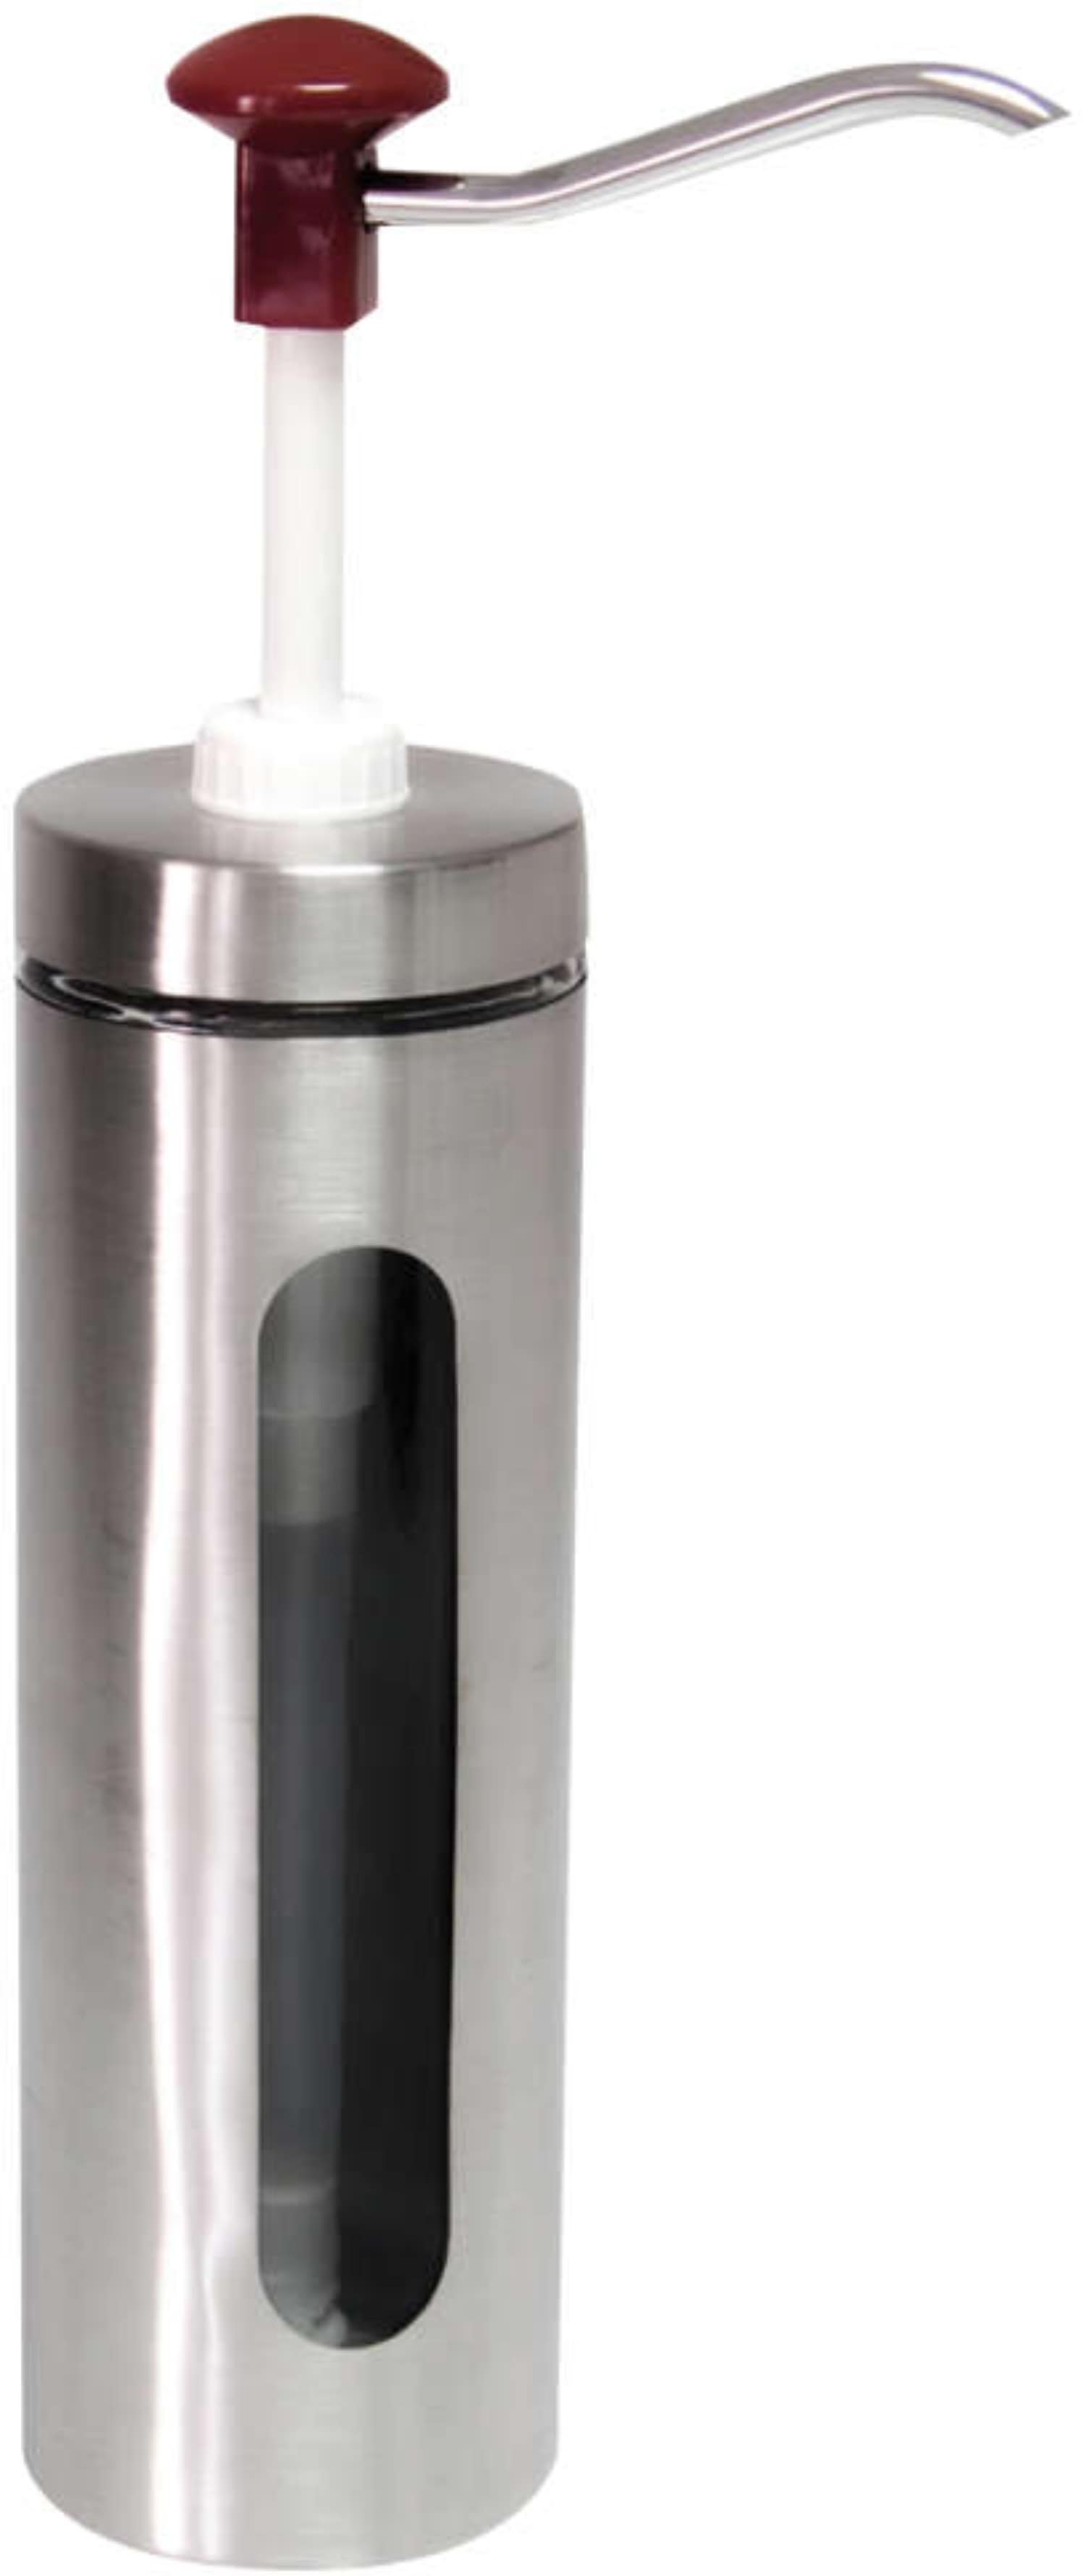 Push button dispenser with glass window